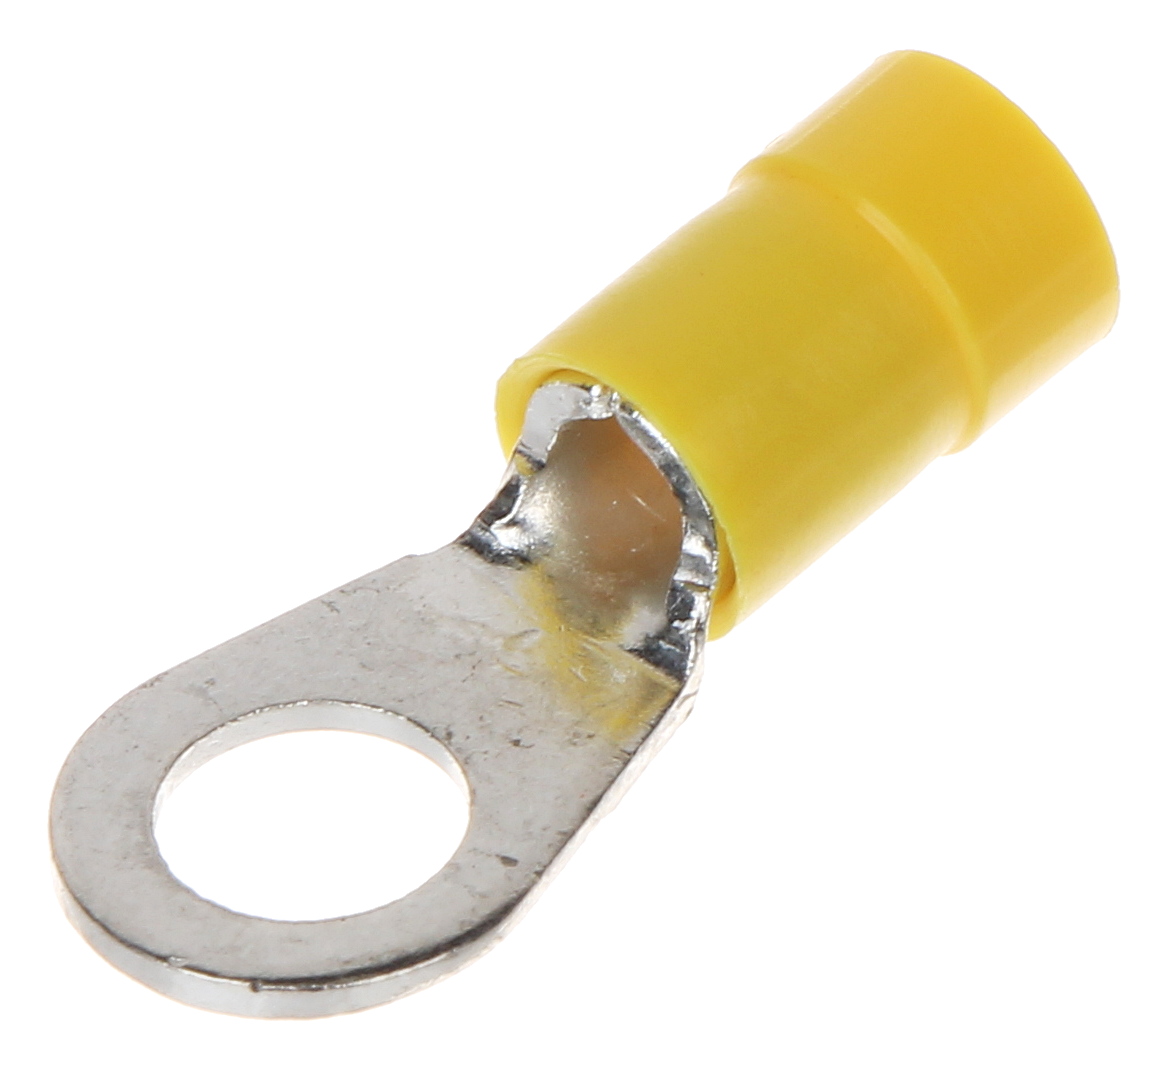 INSULATED RING TERMINAL KSIO-4.0-6.0/M6 - Ring Terminals and Connectors -  Delta